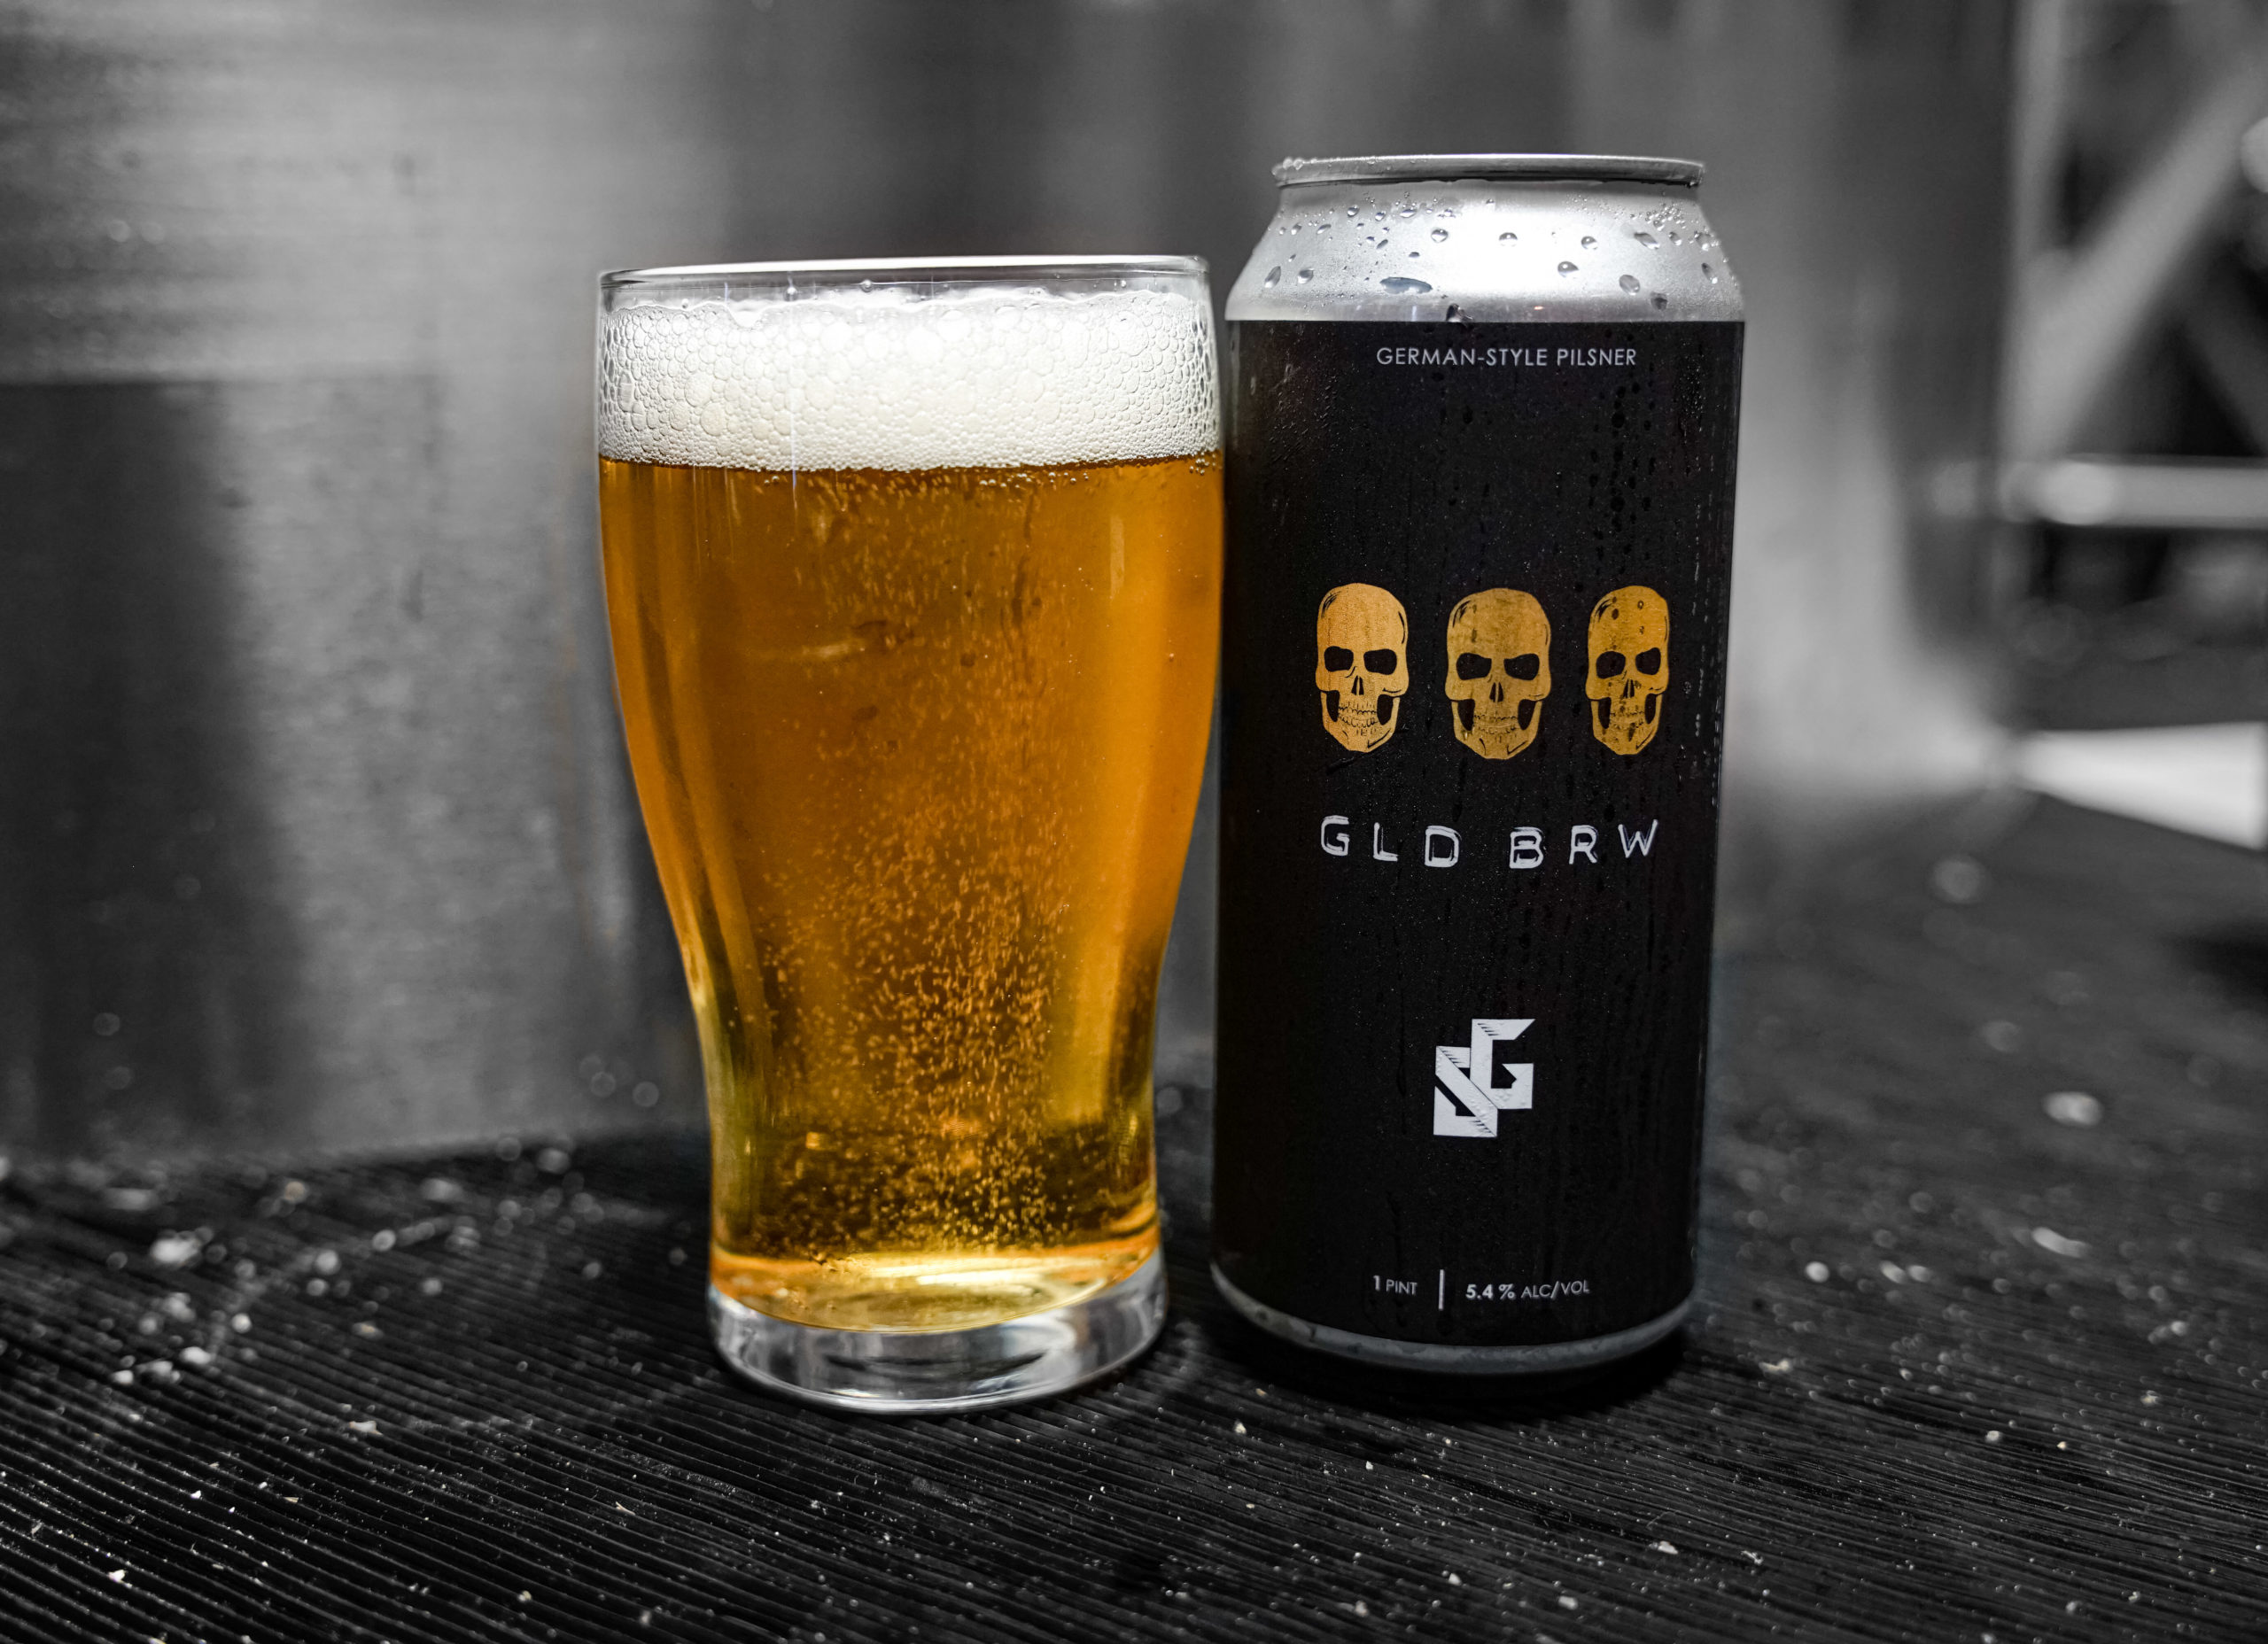 GLD BRW beer image 1